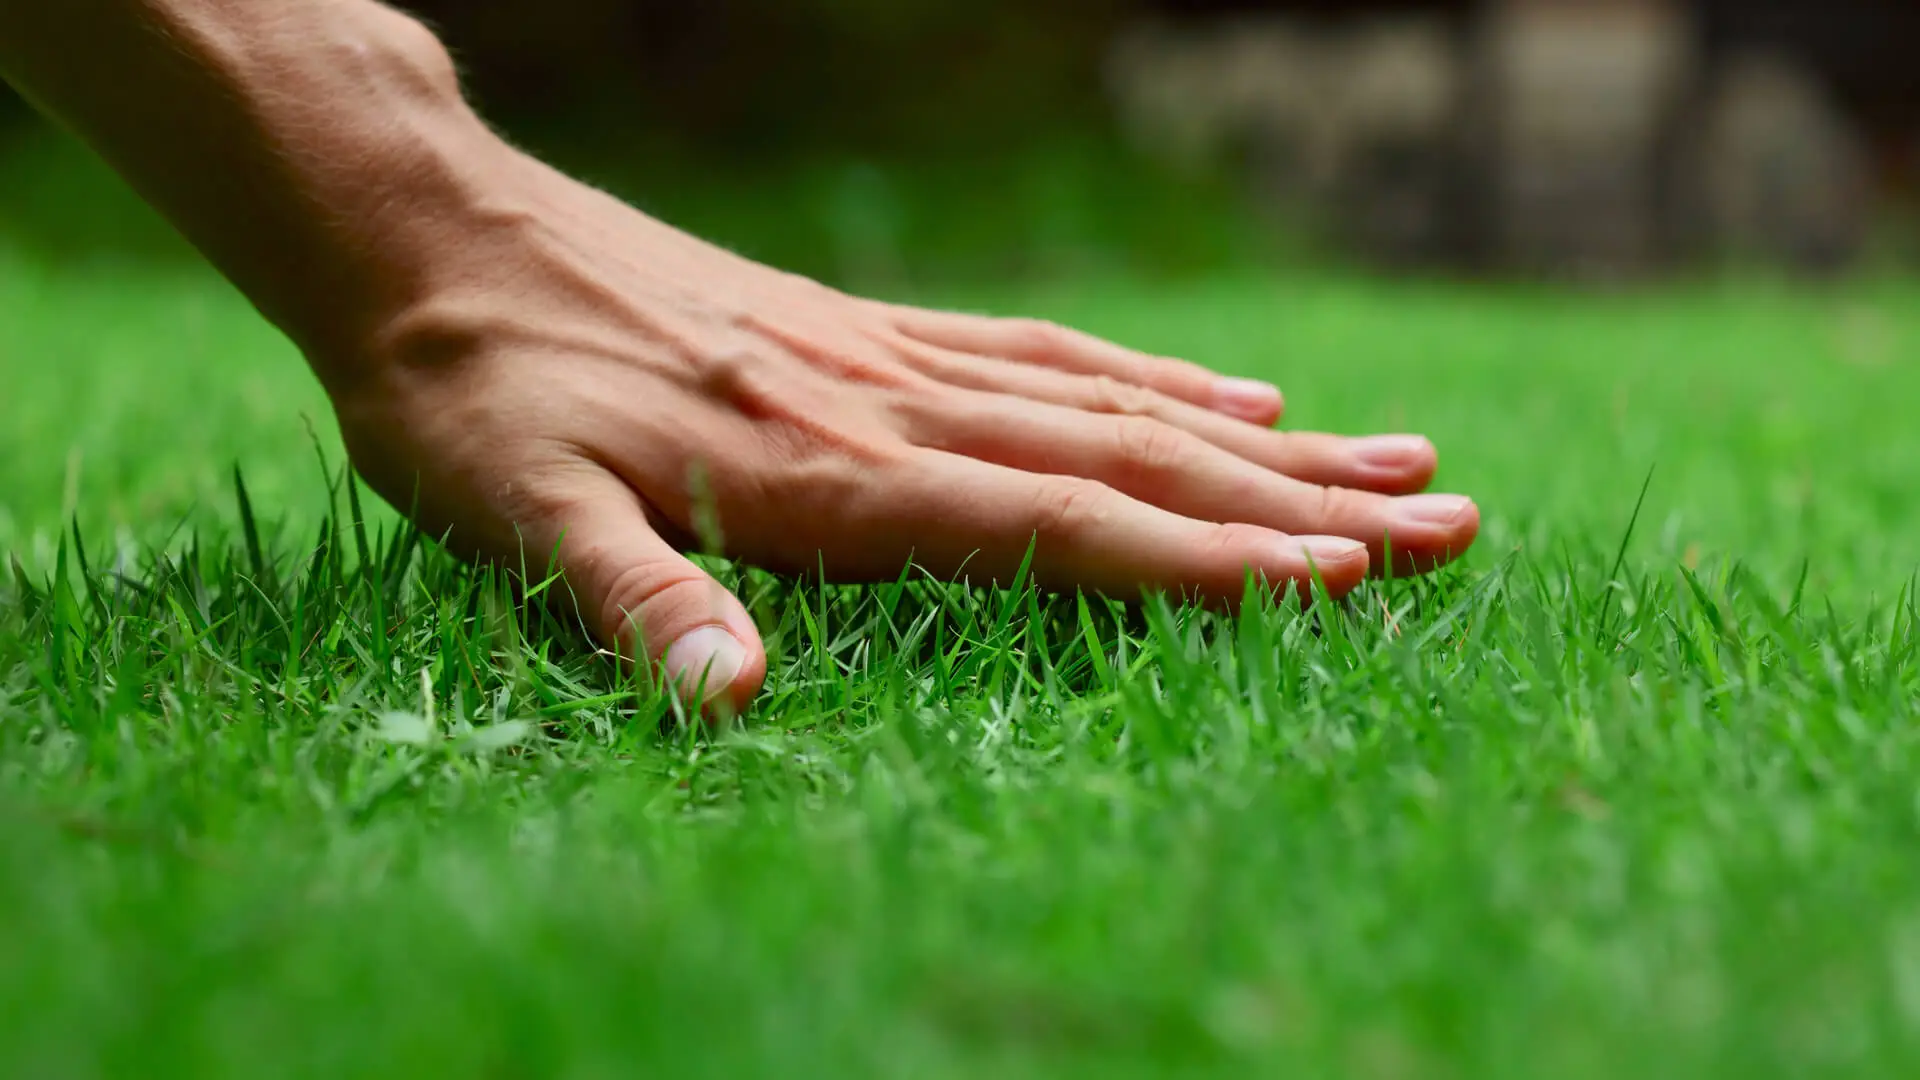 6 Myths and Facts about the Basics of Lawn Care